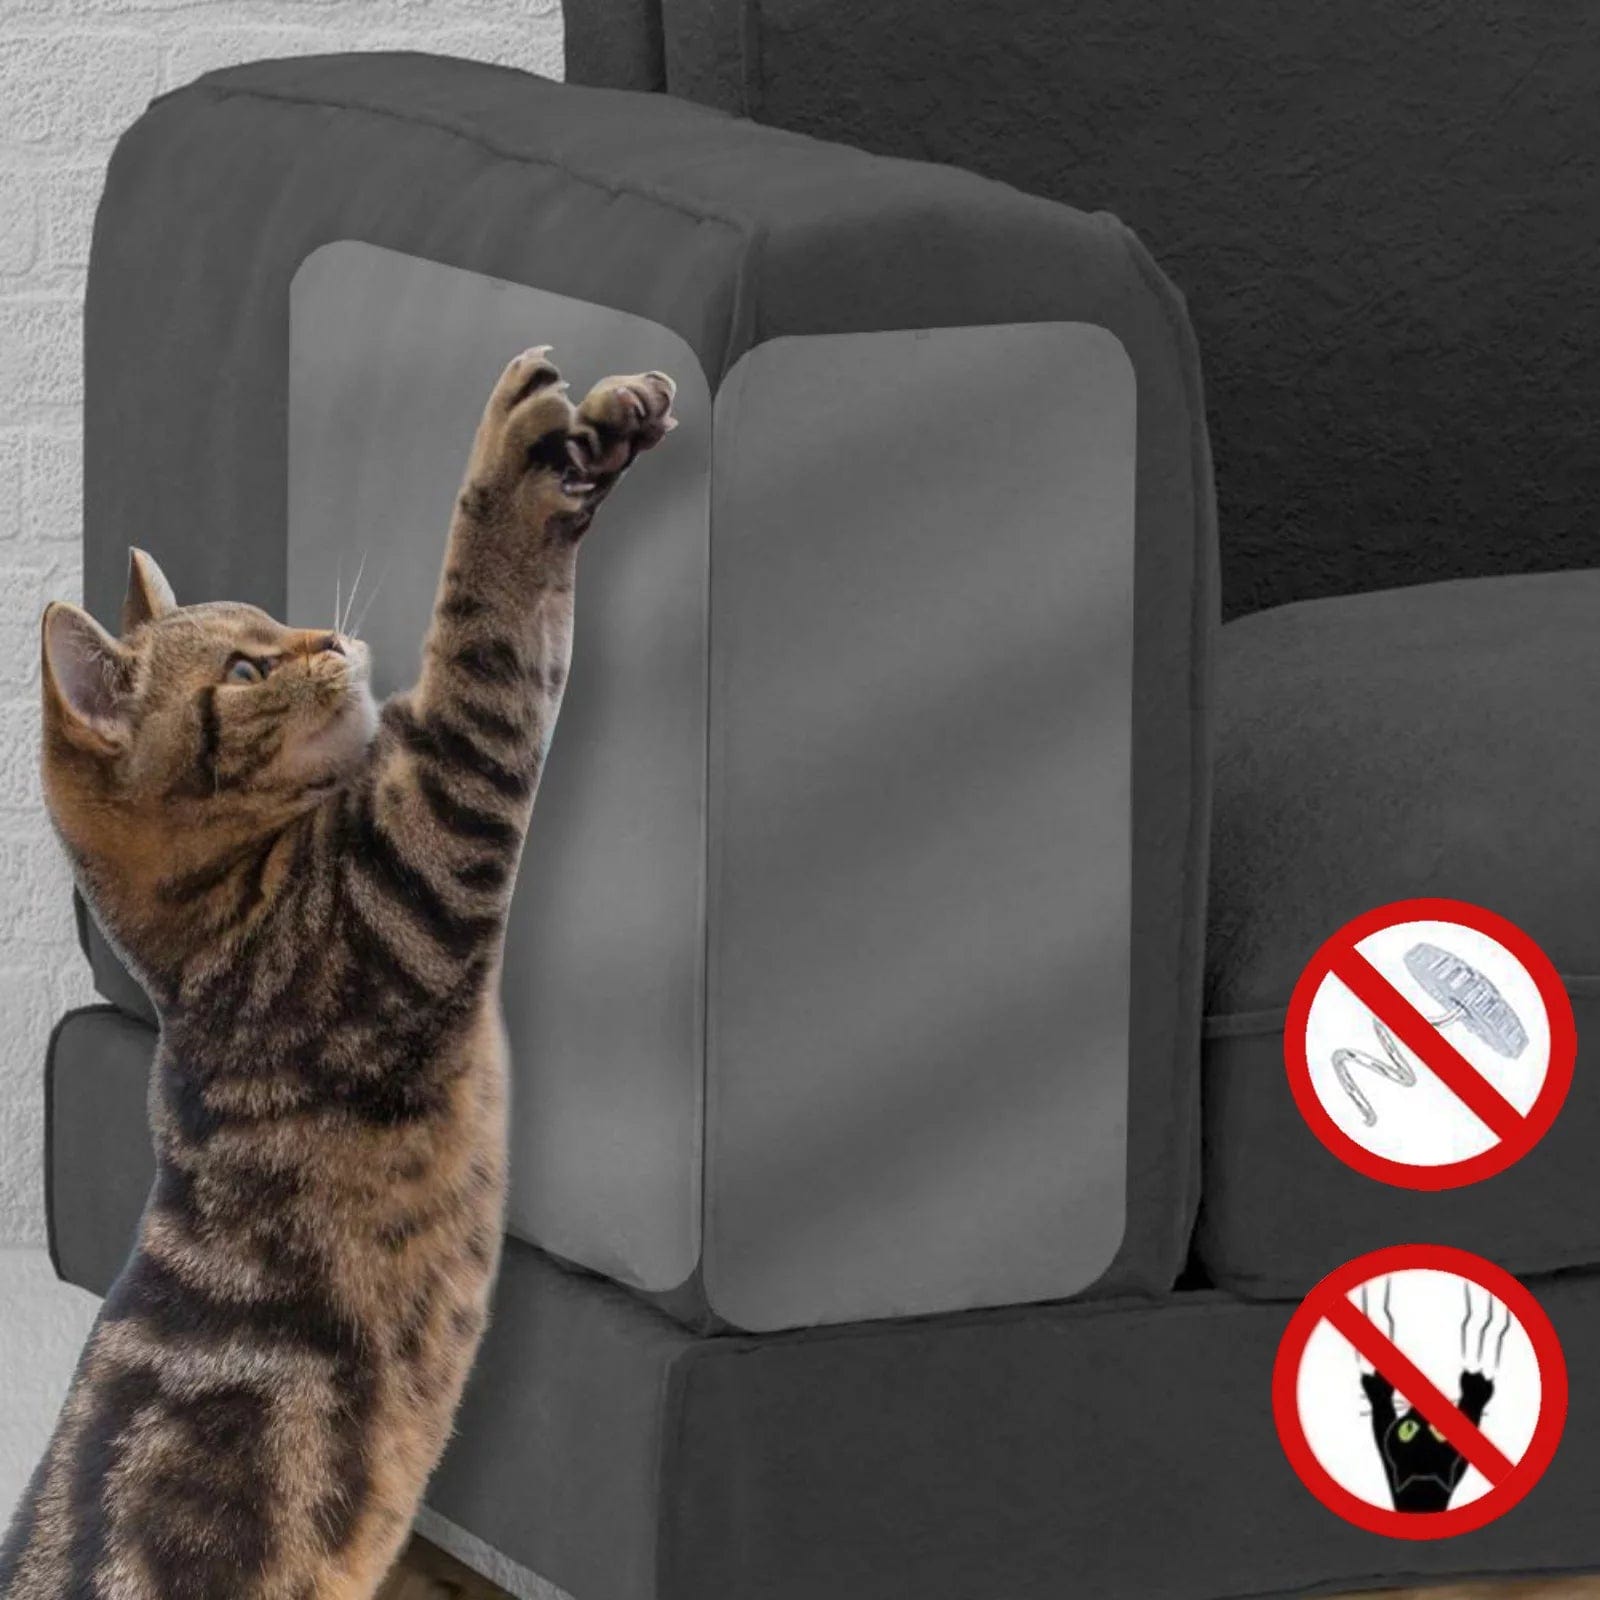 2-Pack Pet Cat Scratch Protector, Furniture & Sofa Shield for Dog & Cat Scratching Deterrent, Defender & Repellent Super Sticky Self-Adhesive Backing